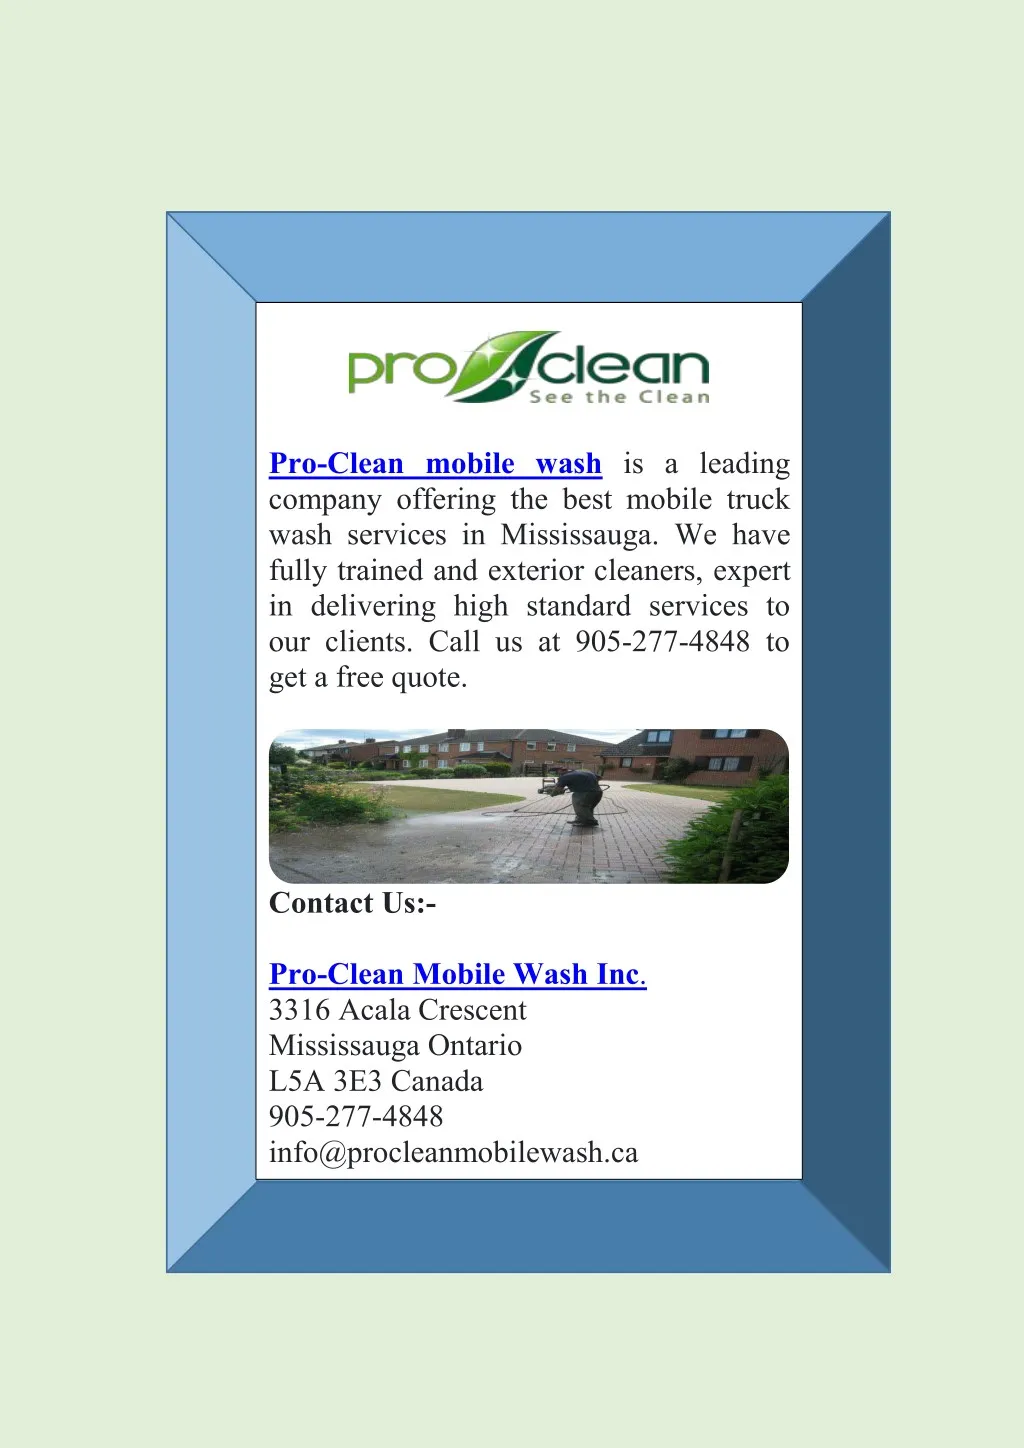 pro clean mobile wash is a leading company